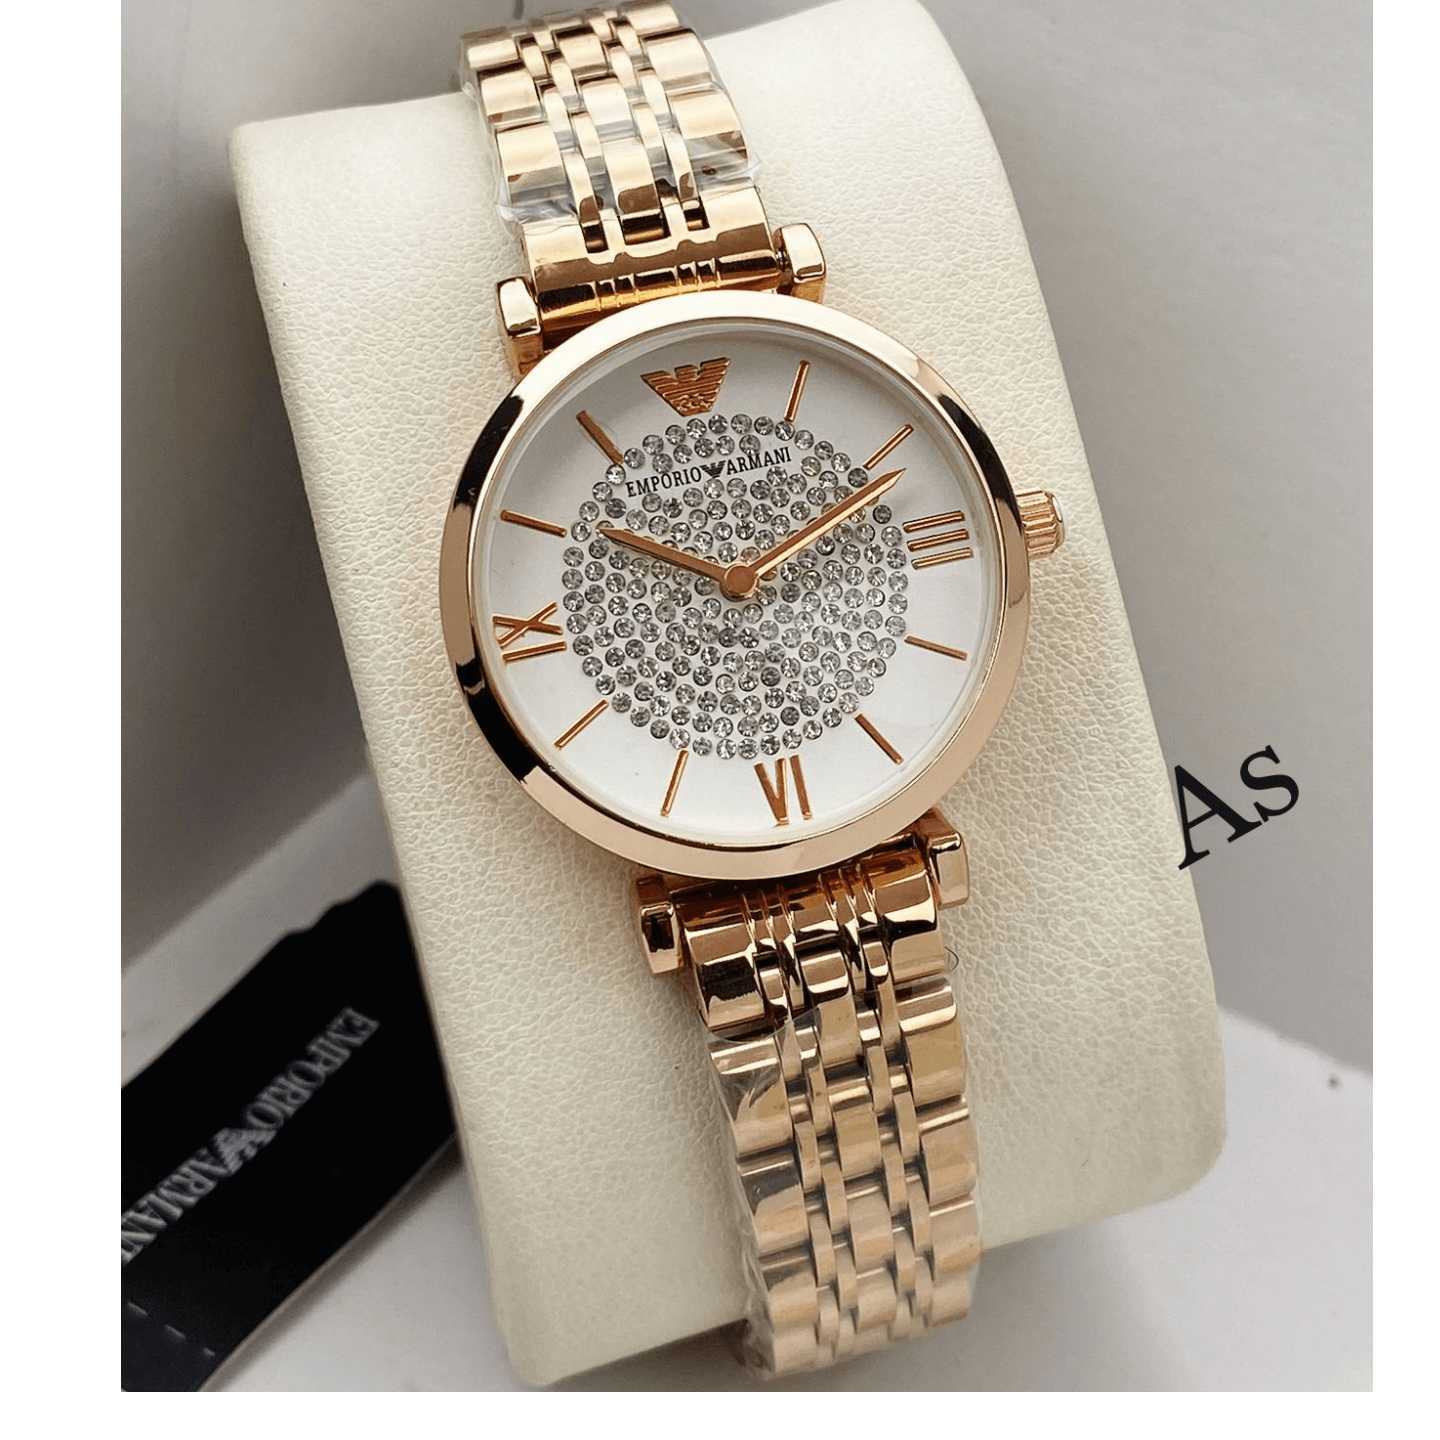 Ladies Armani Watch Gift  Engagement, anniversary, valentines day, mothers day for sister, wife,friend,mother, baby shower